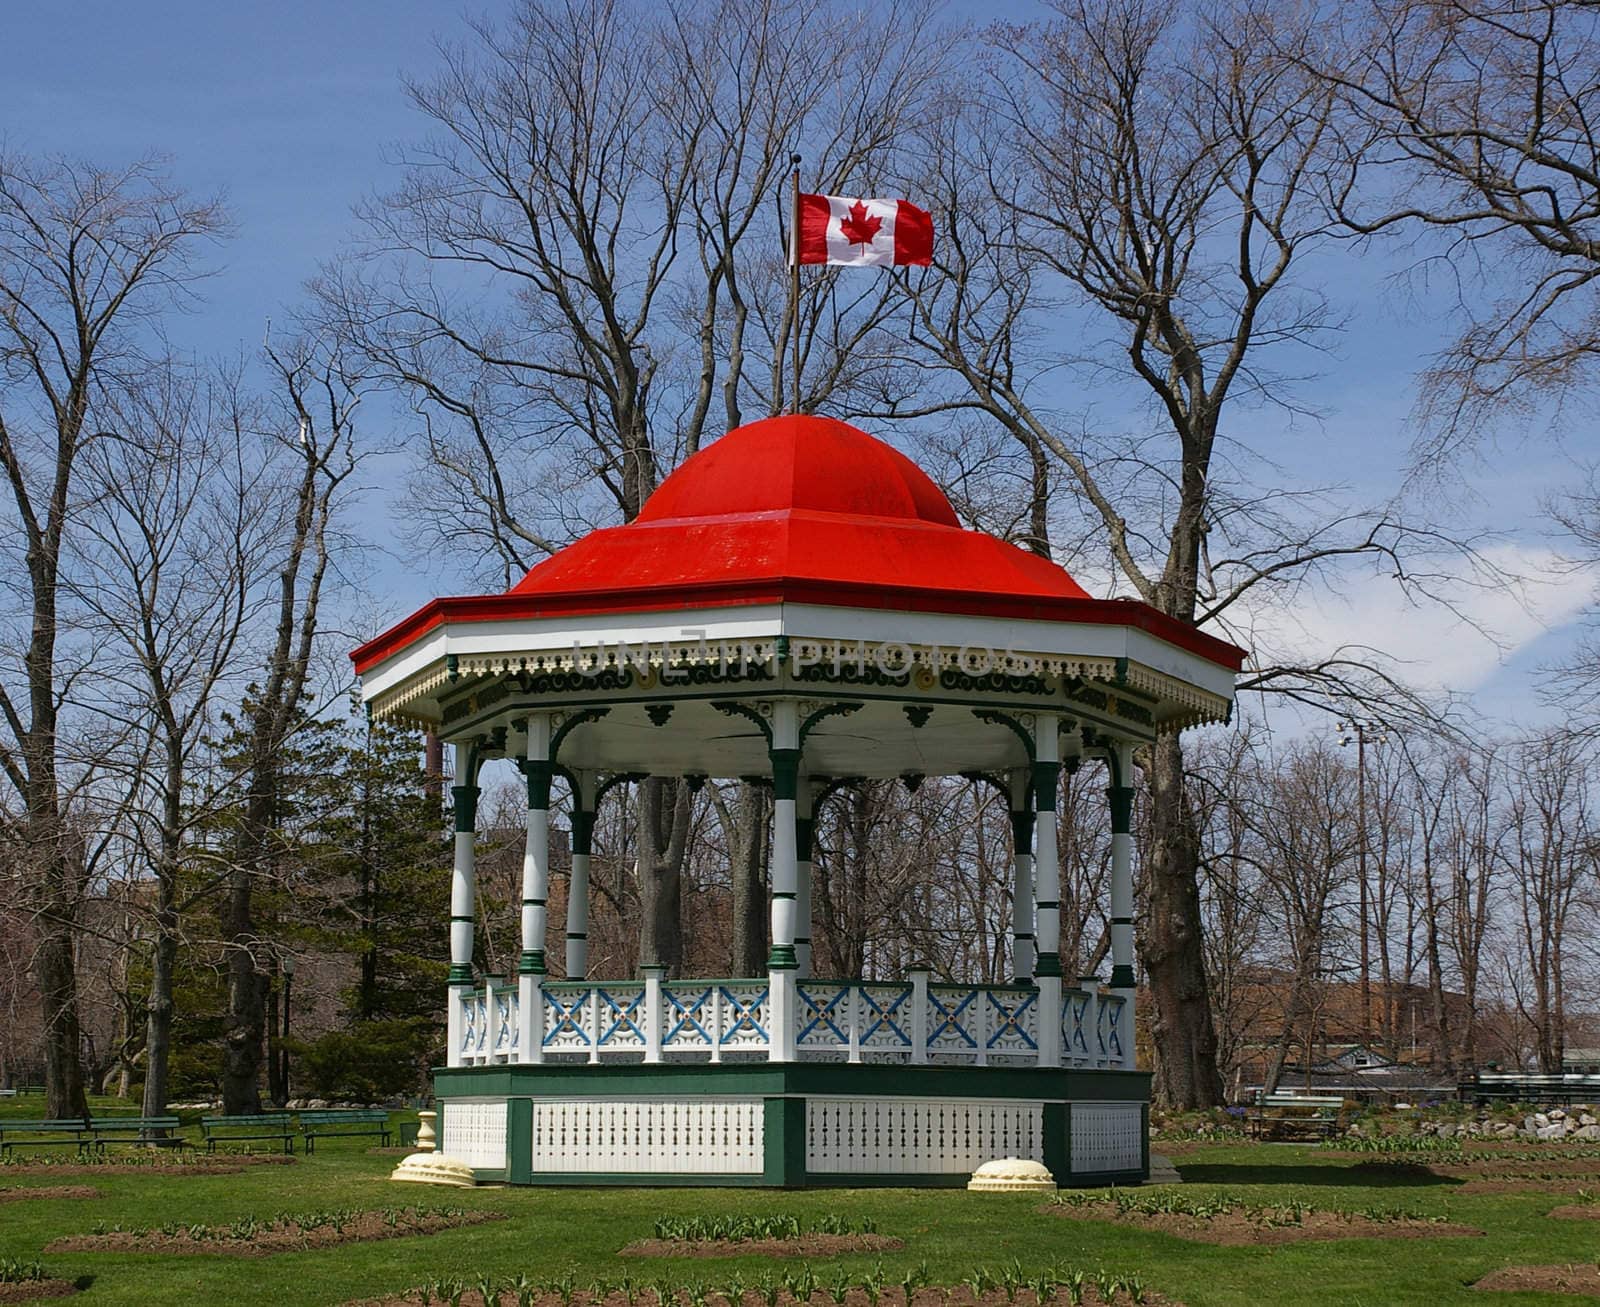 A historic bandstand with the flag flying high.